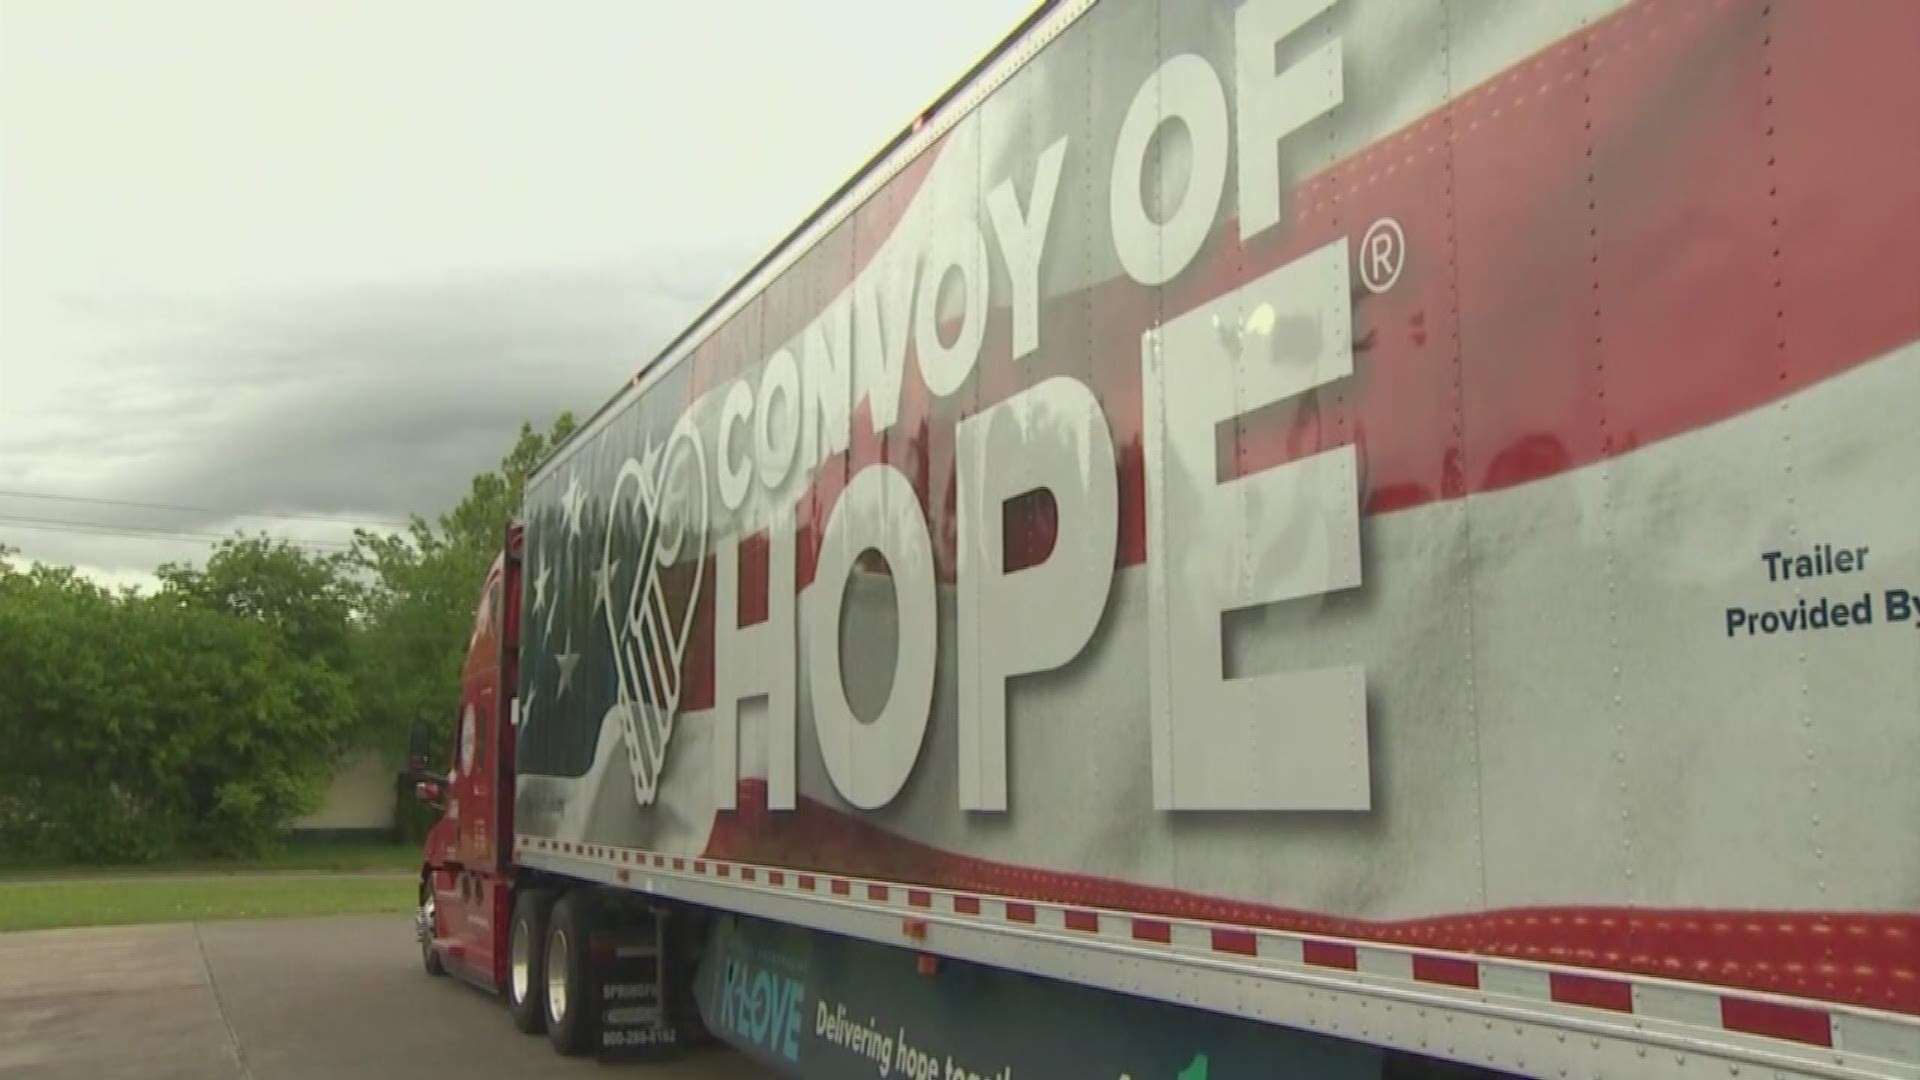 Some local churches are among those helping out those in need this weekend with a truckload of food. The convoy of hope has pulled into Rosenberg with an 18 wheeler full of groceries. They'll be given away Saturday. They say so many people in that part of Fort Bend County are still suffering after Hurricane Harvey.